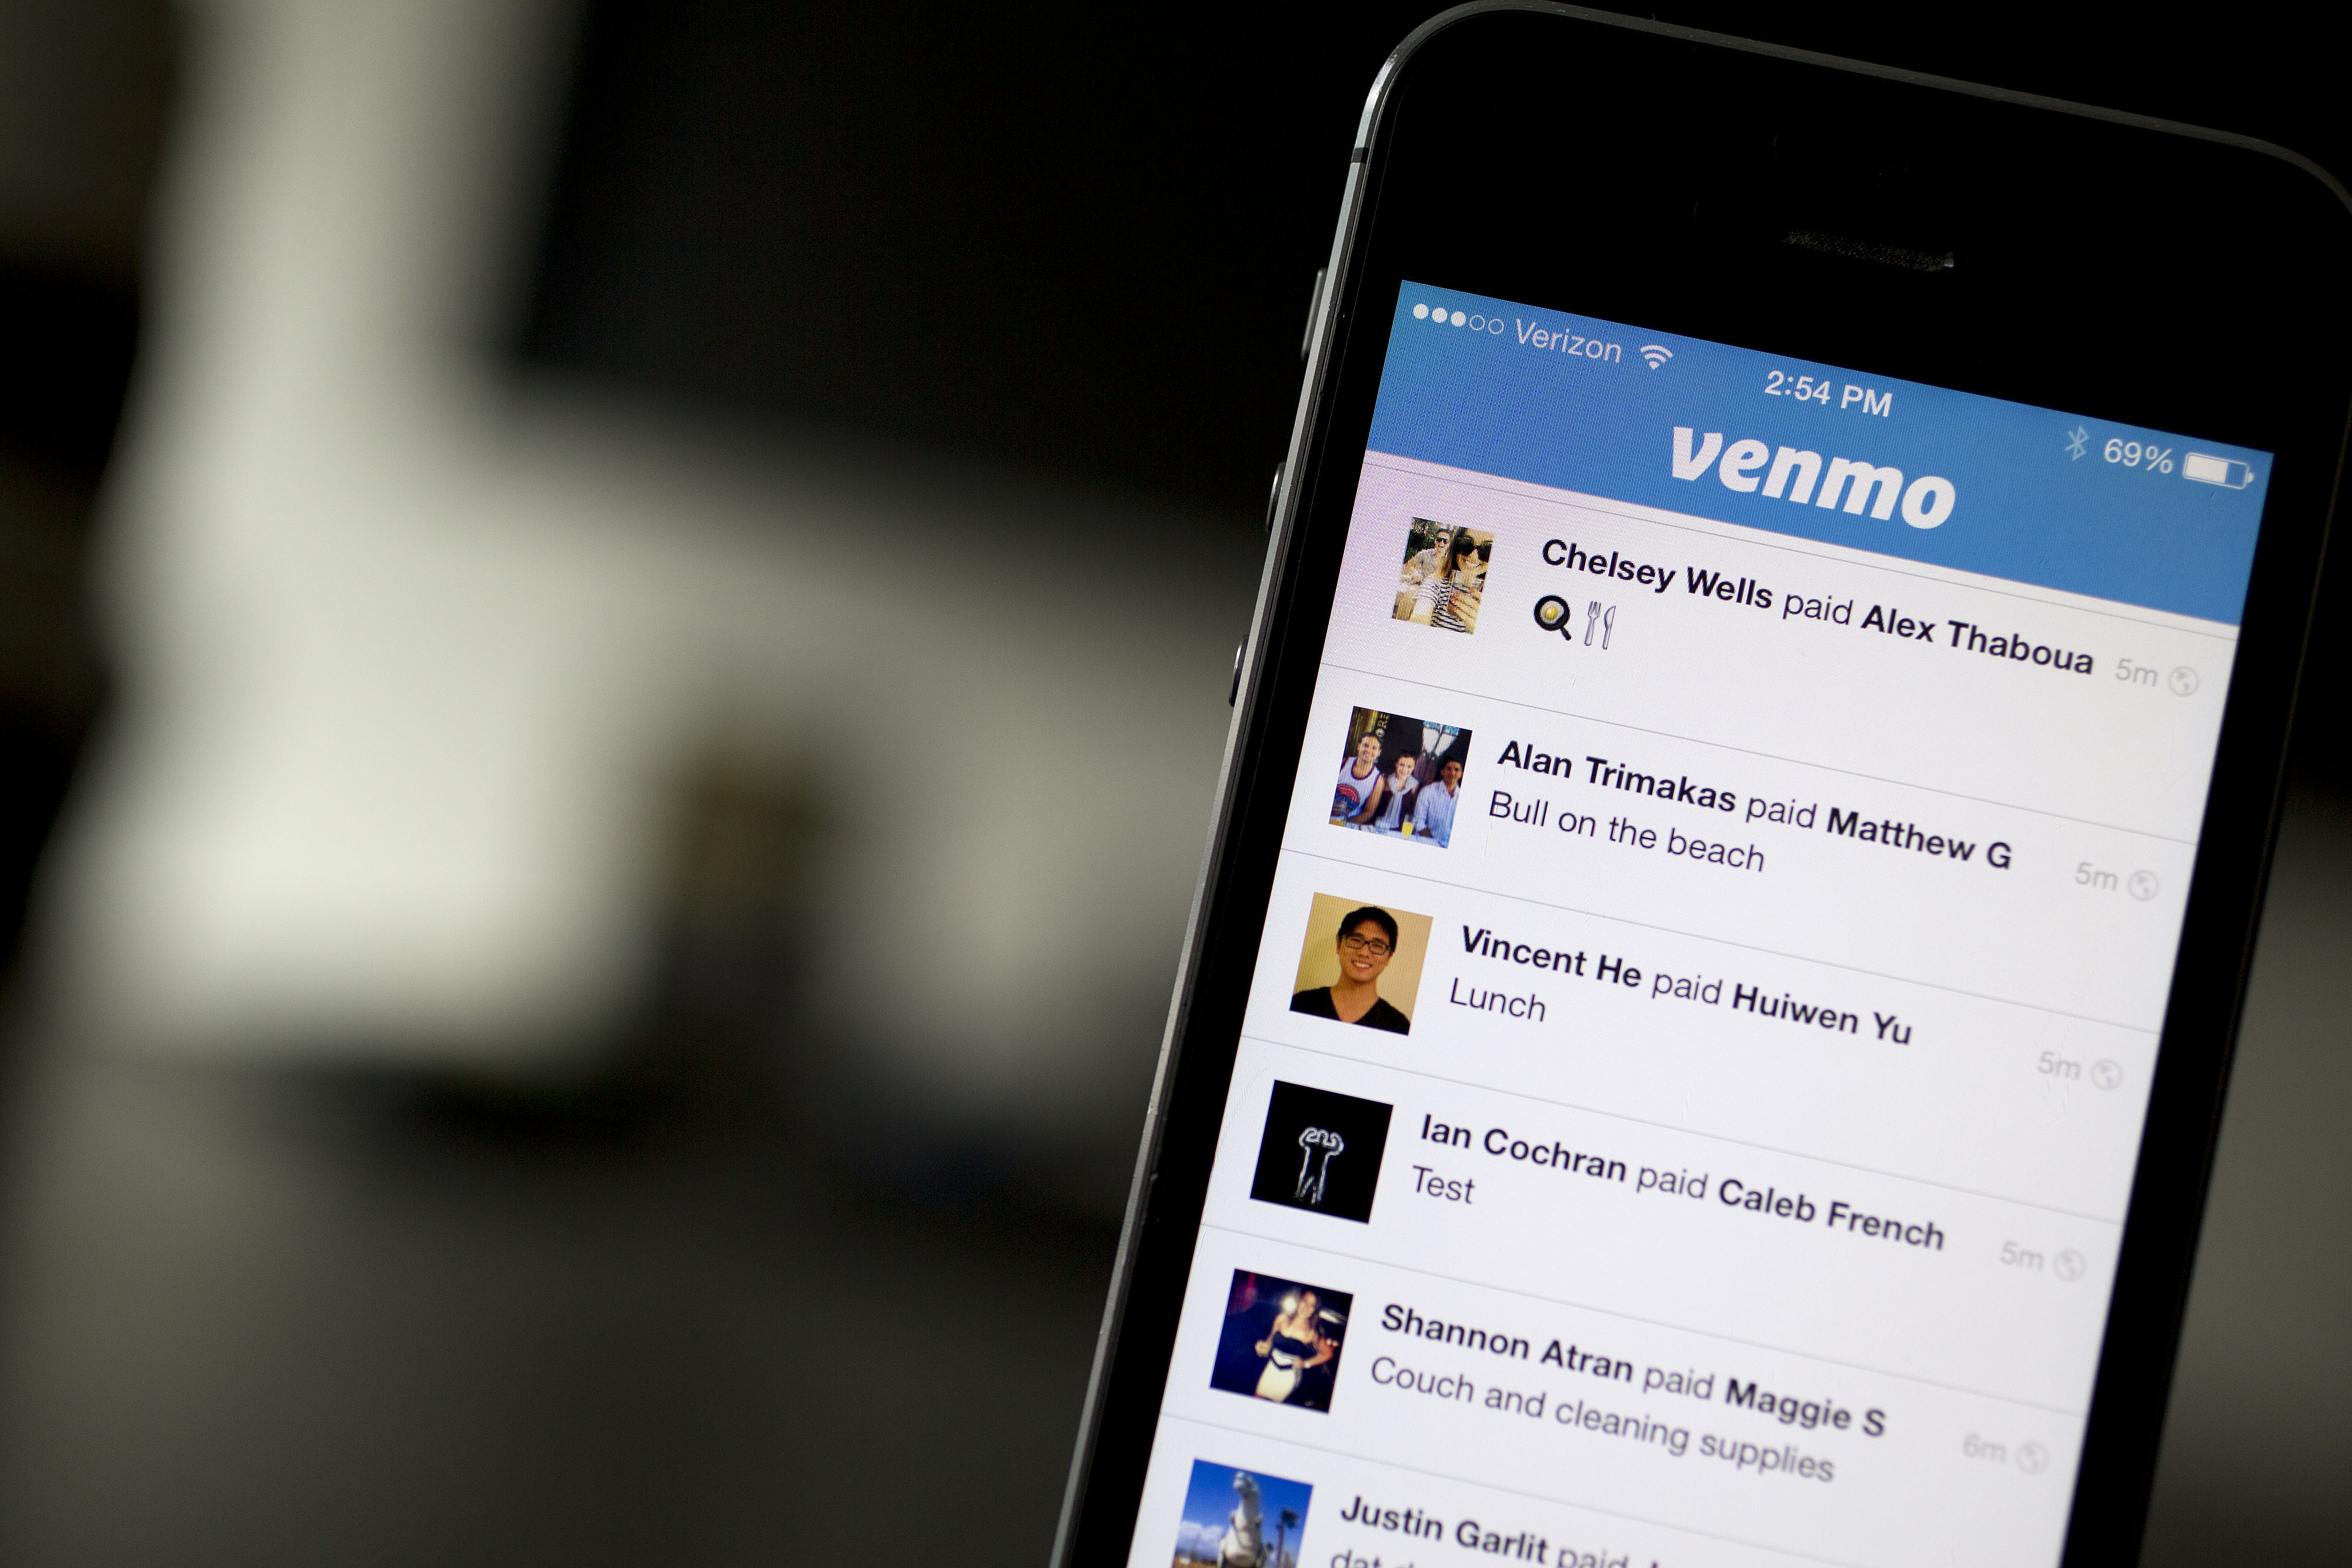 The Ebay Inc. Venmo application (app) is arranged for a photograph on an Apple Inc. iPhone 5s in Washington, D.C., U.S., on Friday, Aug. 22, 2014. (Bloomberg&mdash;Bloomberg via Getty Images)